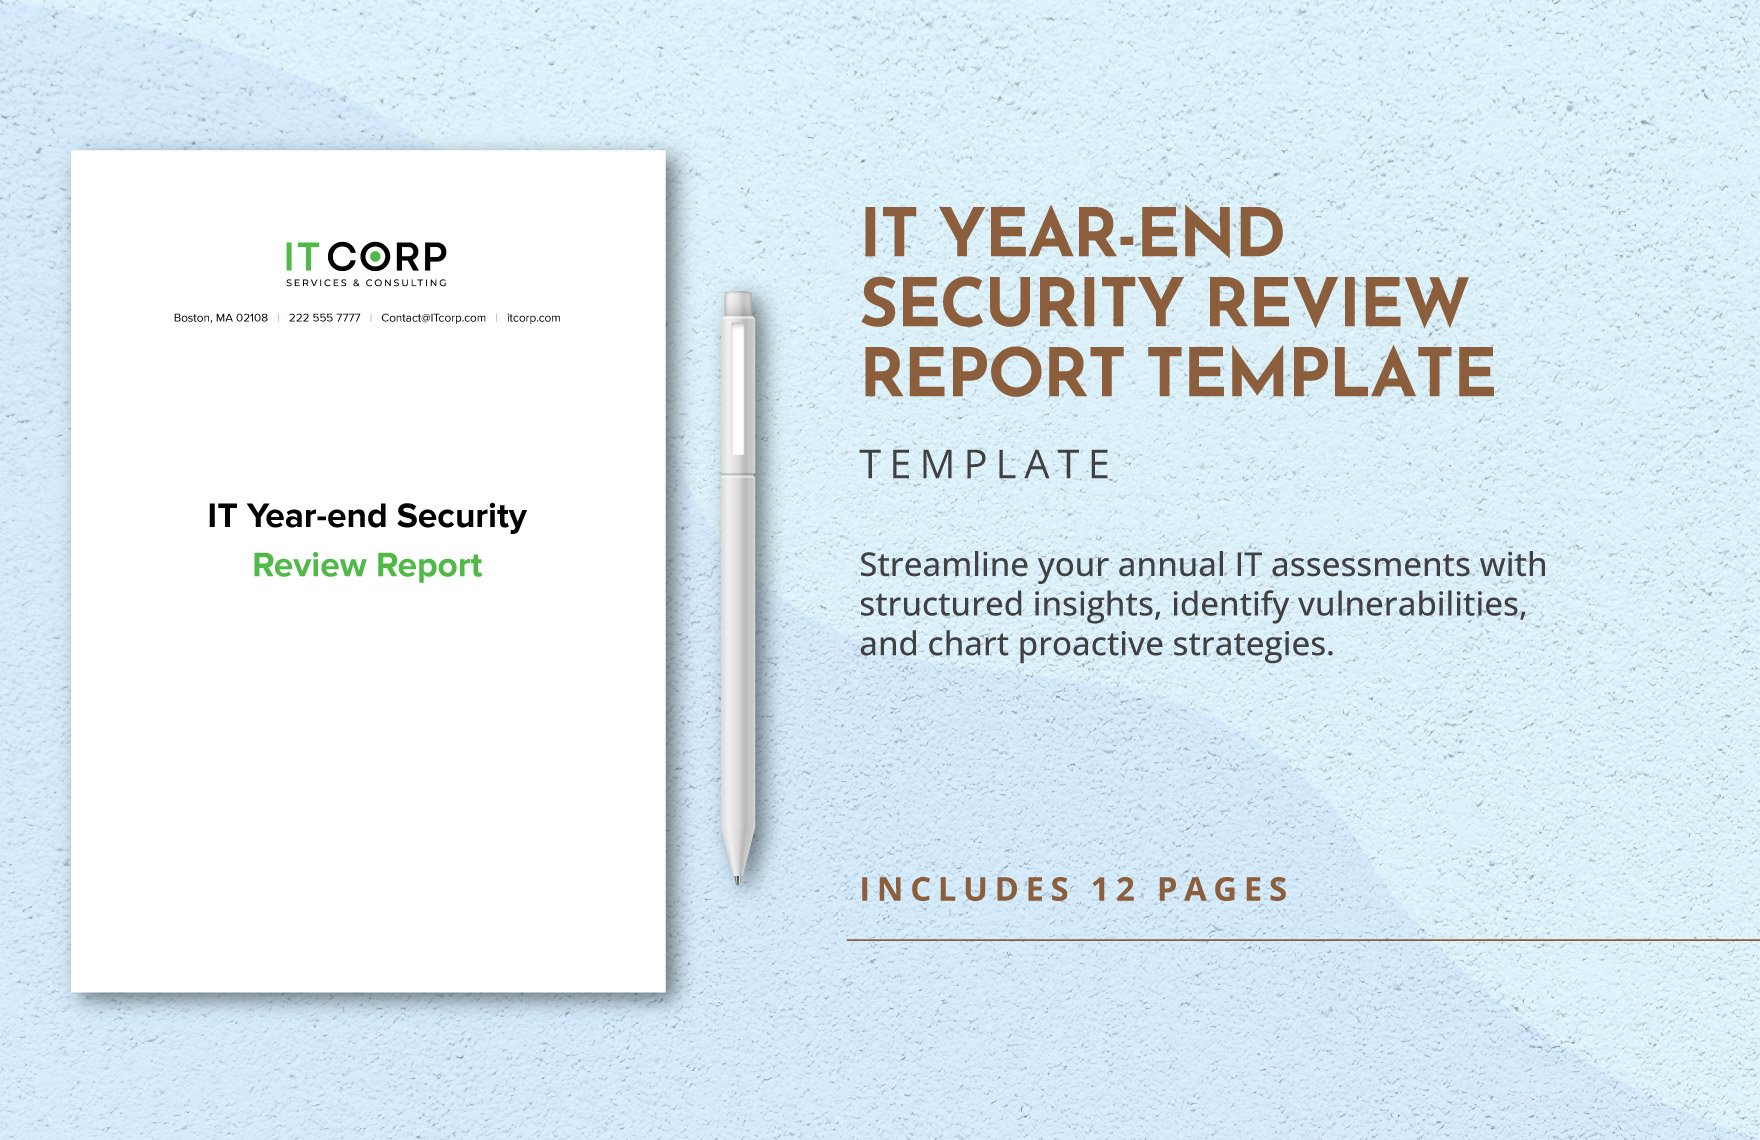 IT Year-end Security Review Report Template